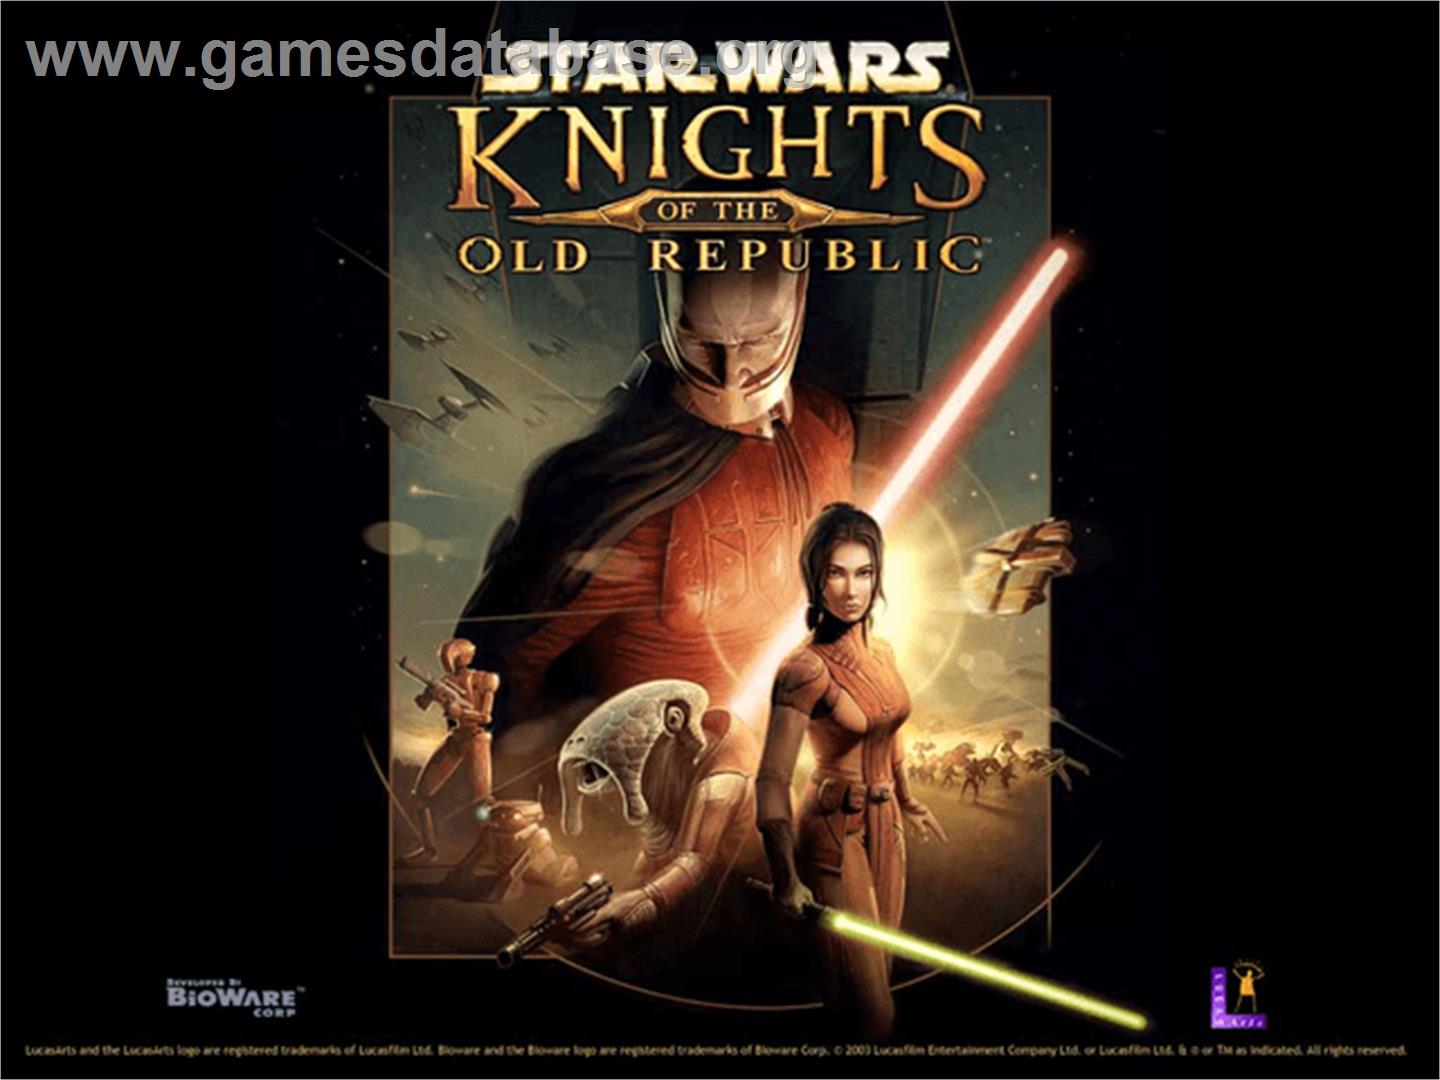 Star Wars: Knights of the Old Republic - Microsoft Xbox - Artwork - Title Screen